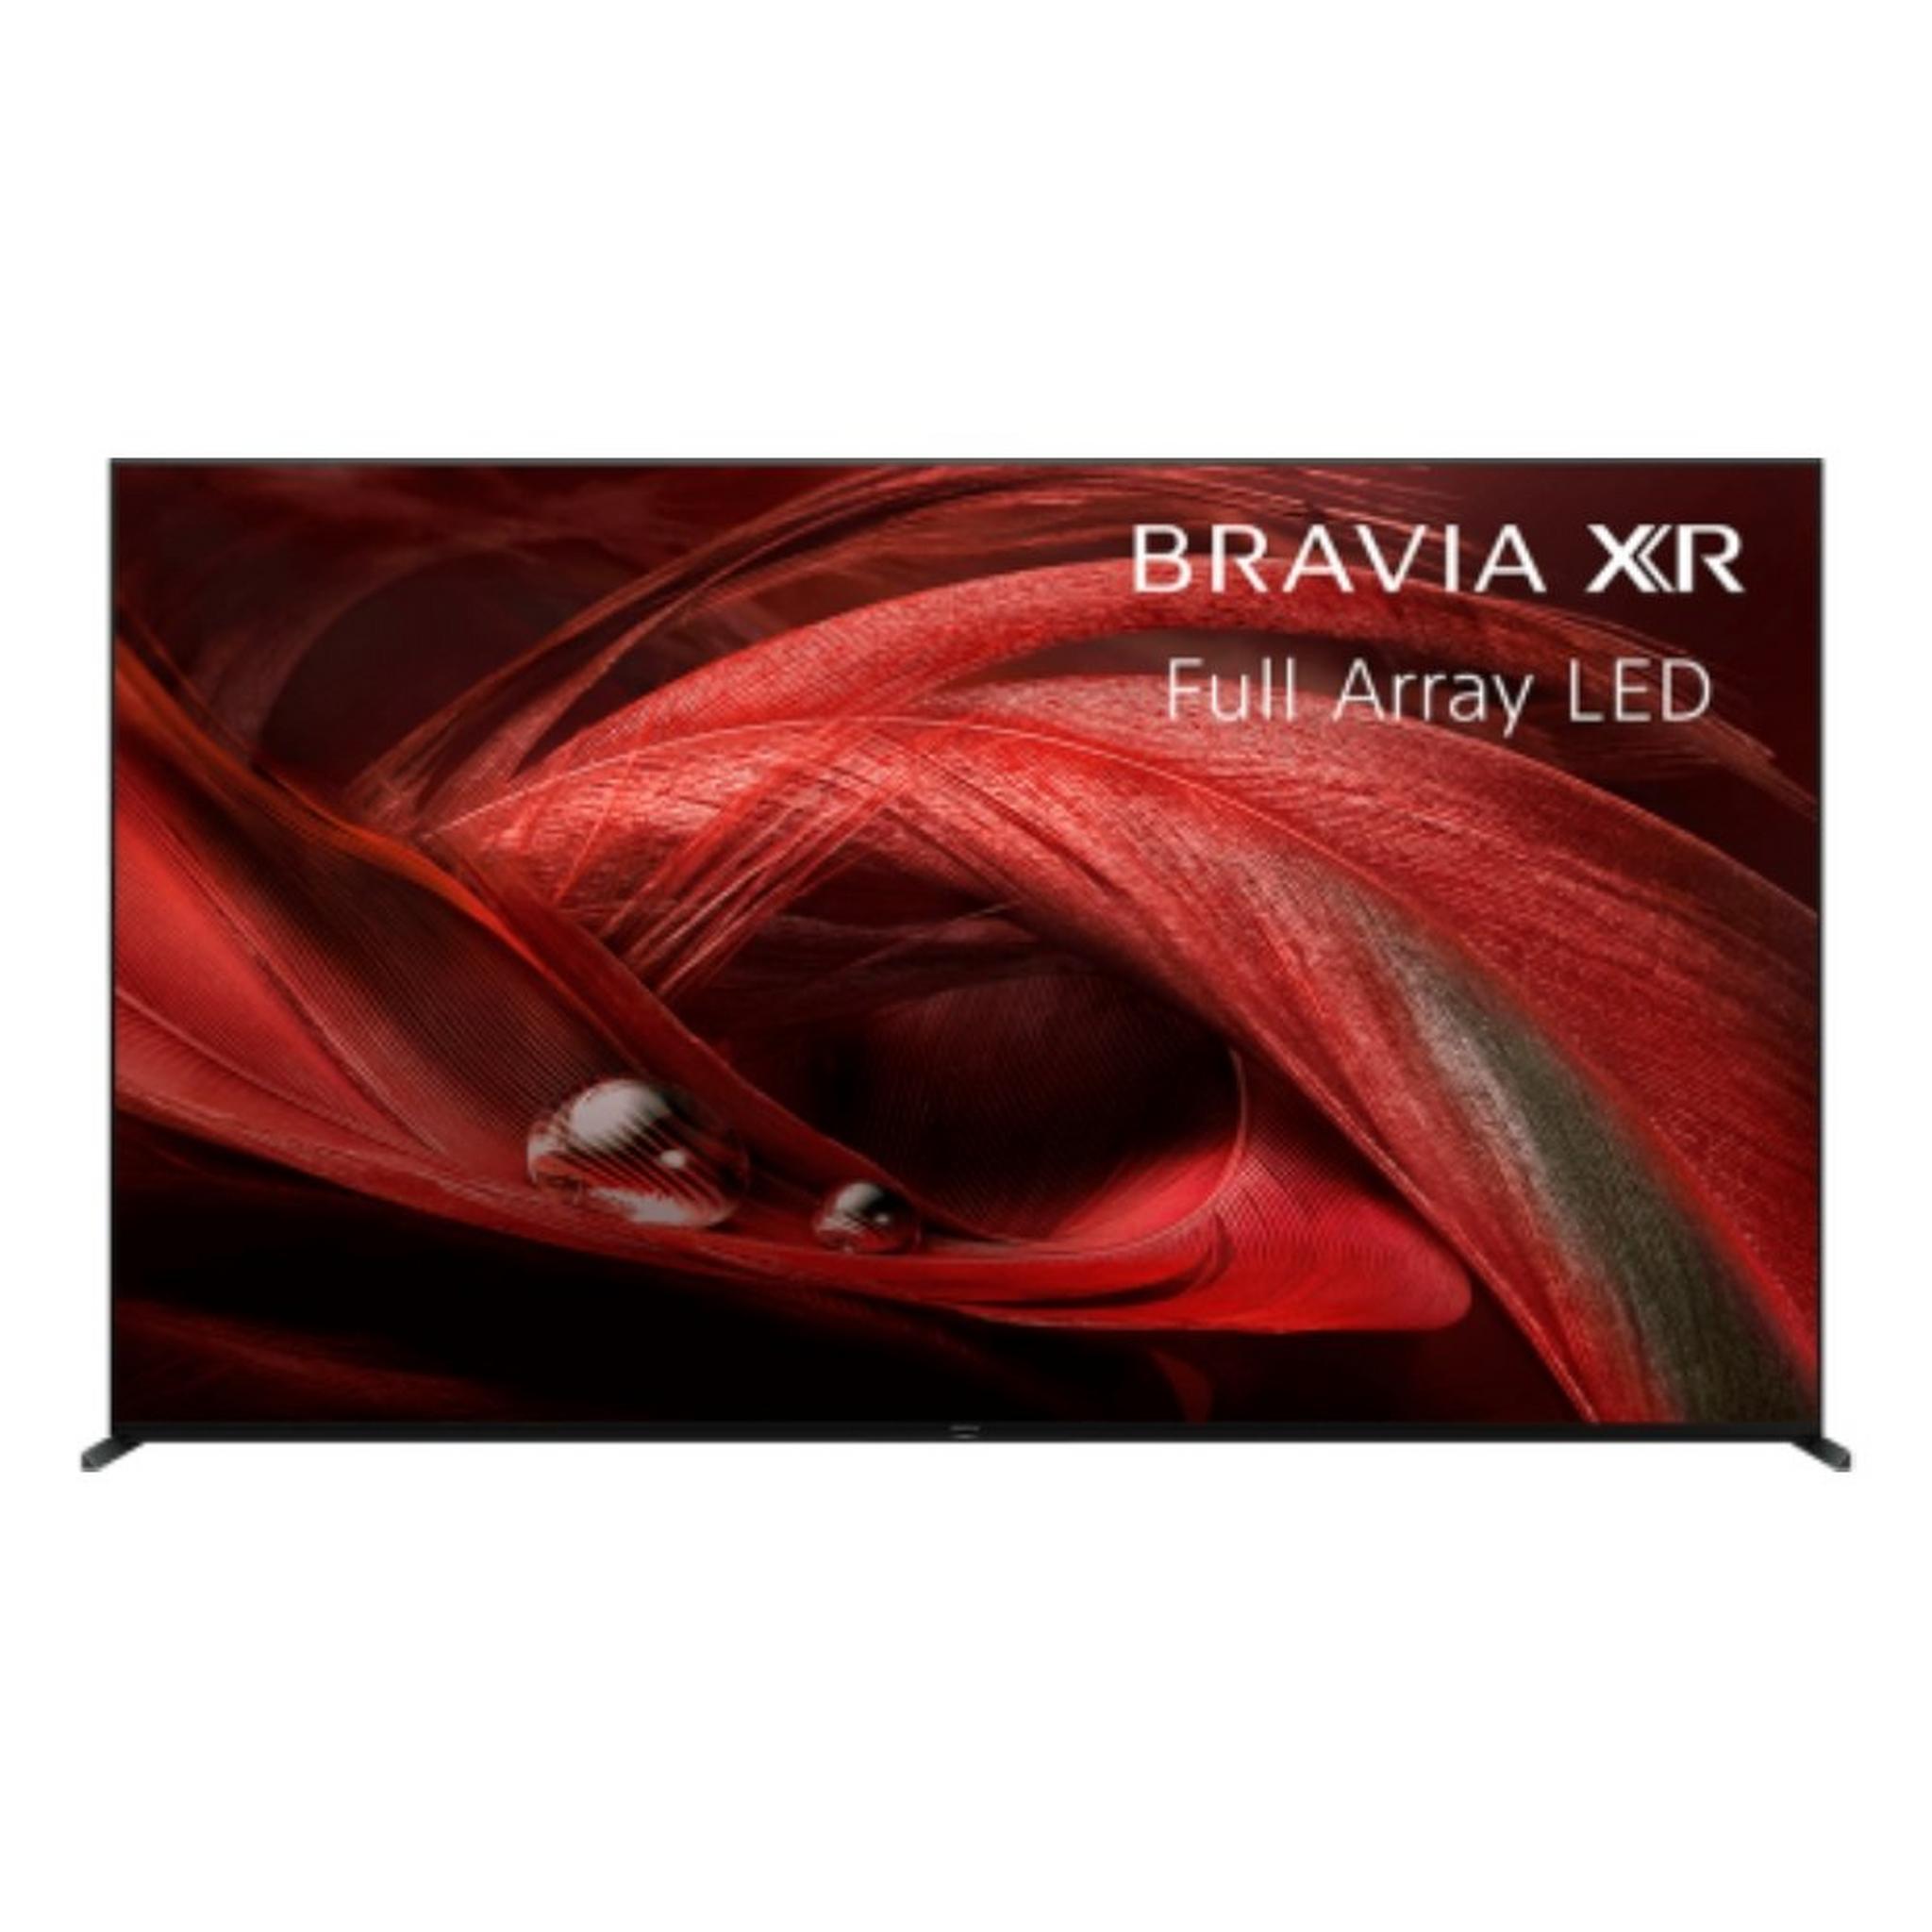 Sony Series X95J 65-inch 4K Android HDR TV (XR-65X95J)